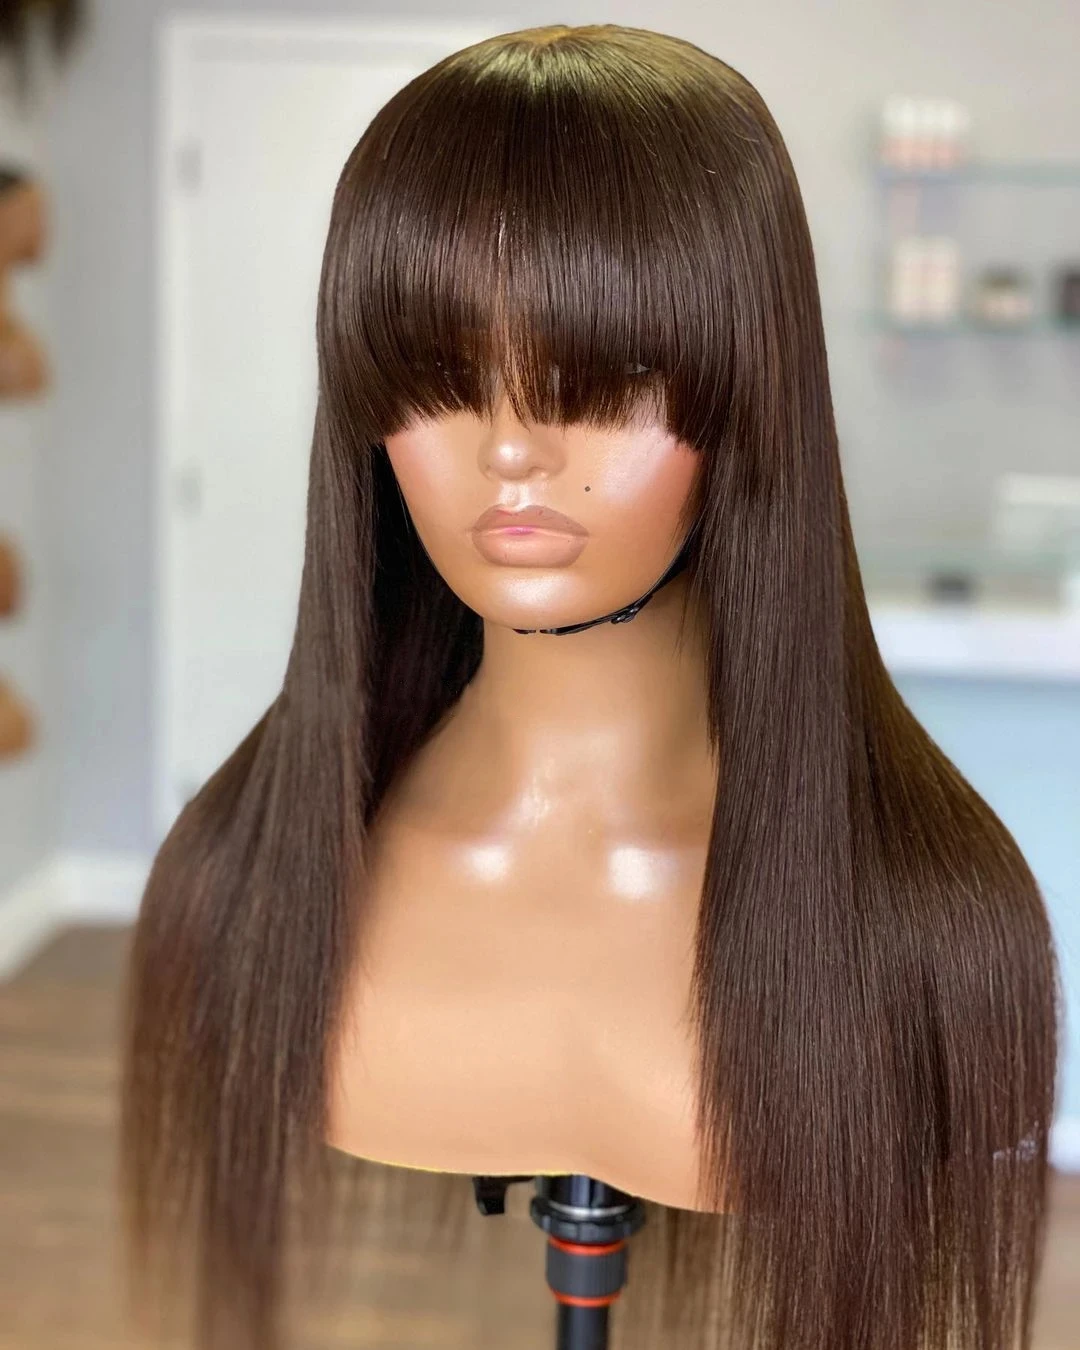 

26Inches Long Dark Brown Fringe Lace Front Wigs for Black Women Glueless Synthetic Chocolate Brown Silky Straight Short Bob Hair